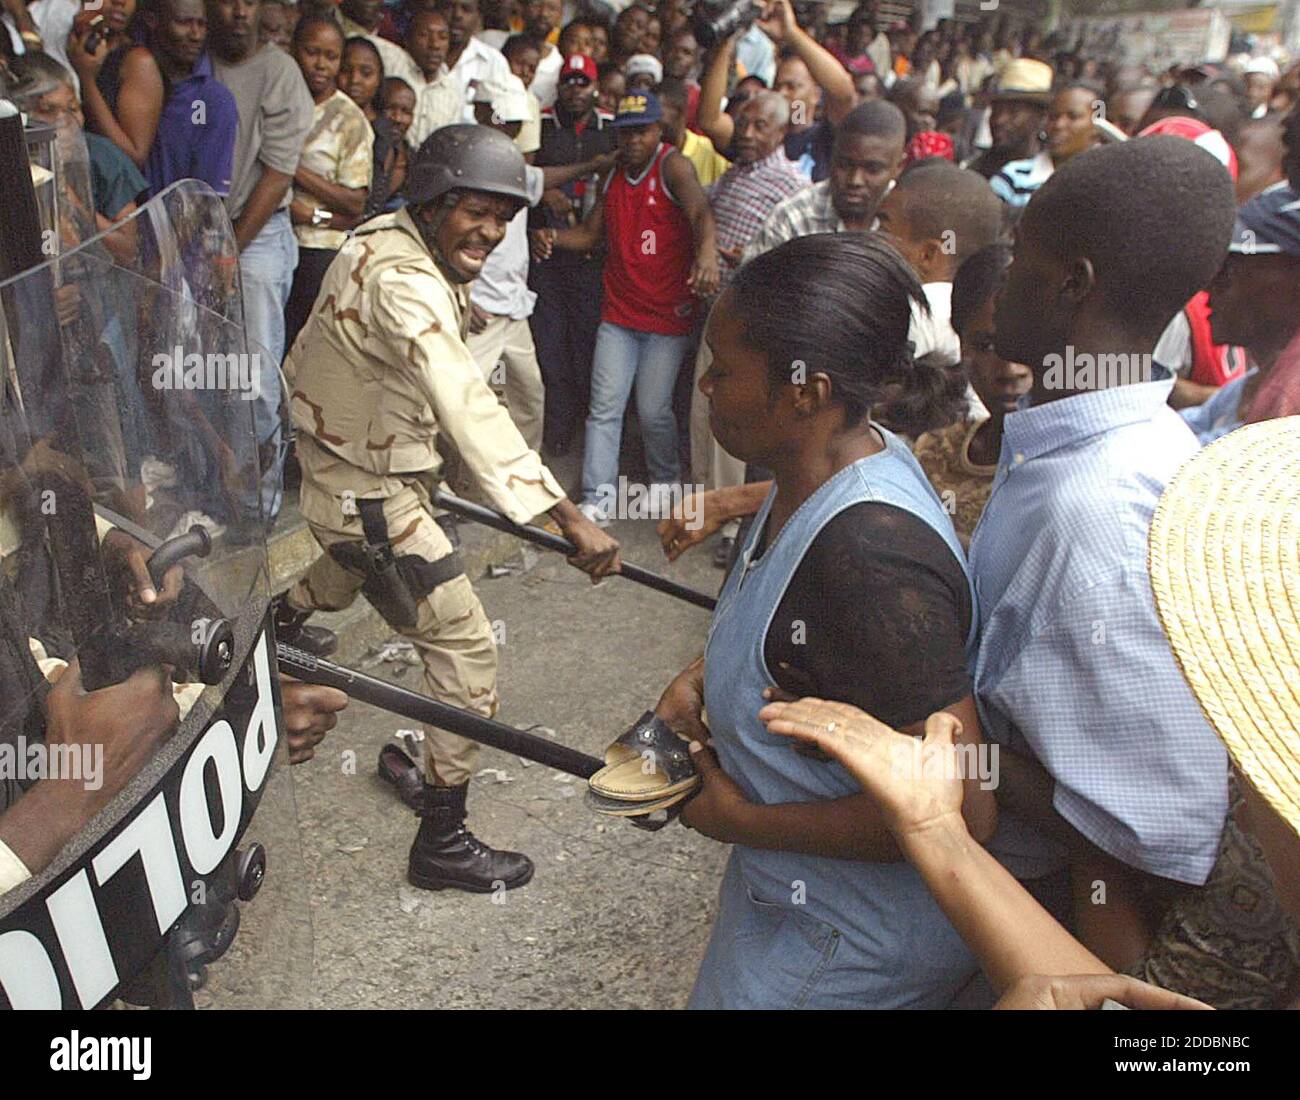 NO FILM, NO VIDEO, NO TV, NO DOCUMENTARY - A Haitian police officer fends off voters in front of the doors of the Lycee de Petion-ville, in Haiti, Tuesday, February 7, 2006. Photo by C.W. Griffin/Miami Herald/KRT/ABACAPRESS.COM Stock Photo